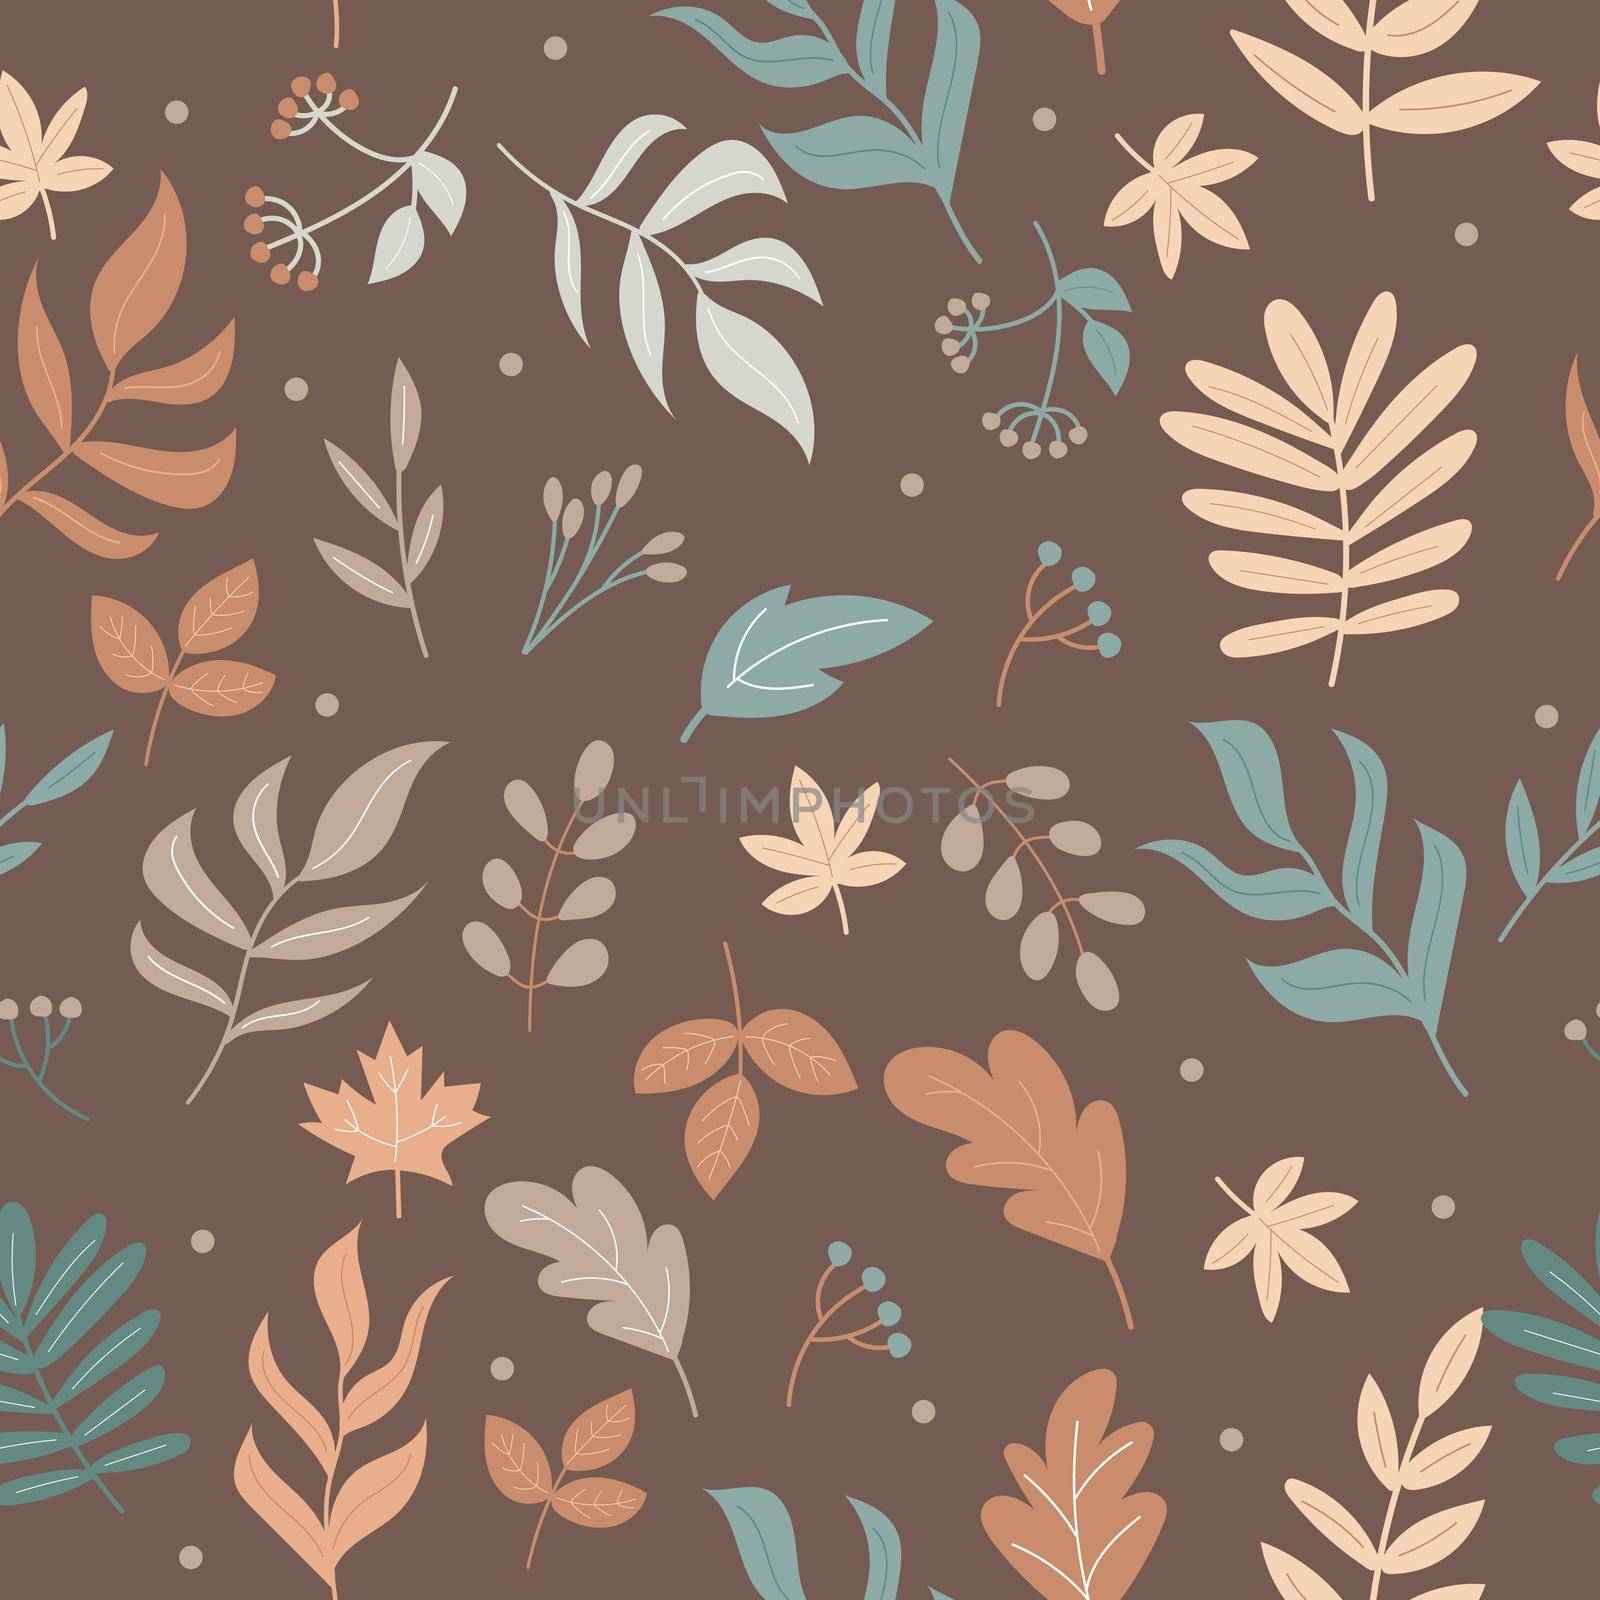 Autumn elements seamless pattern. Endless pattern for packaging by natali_brill